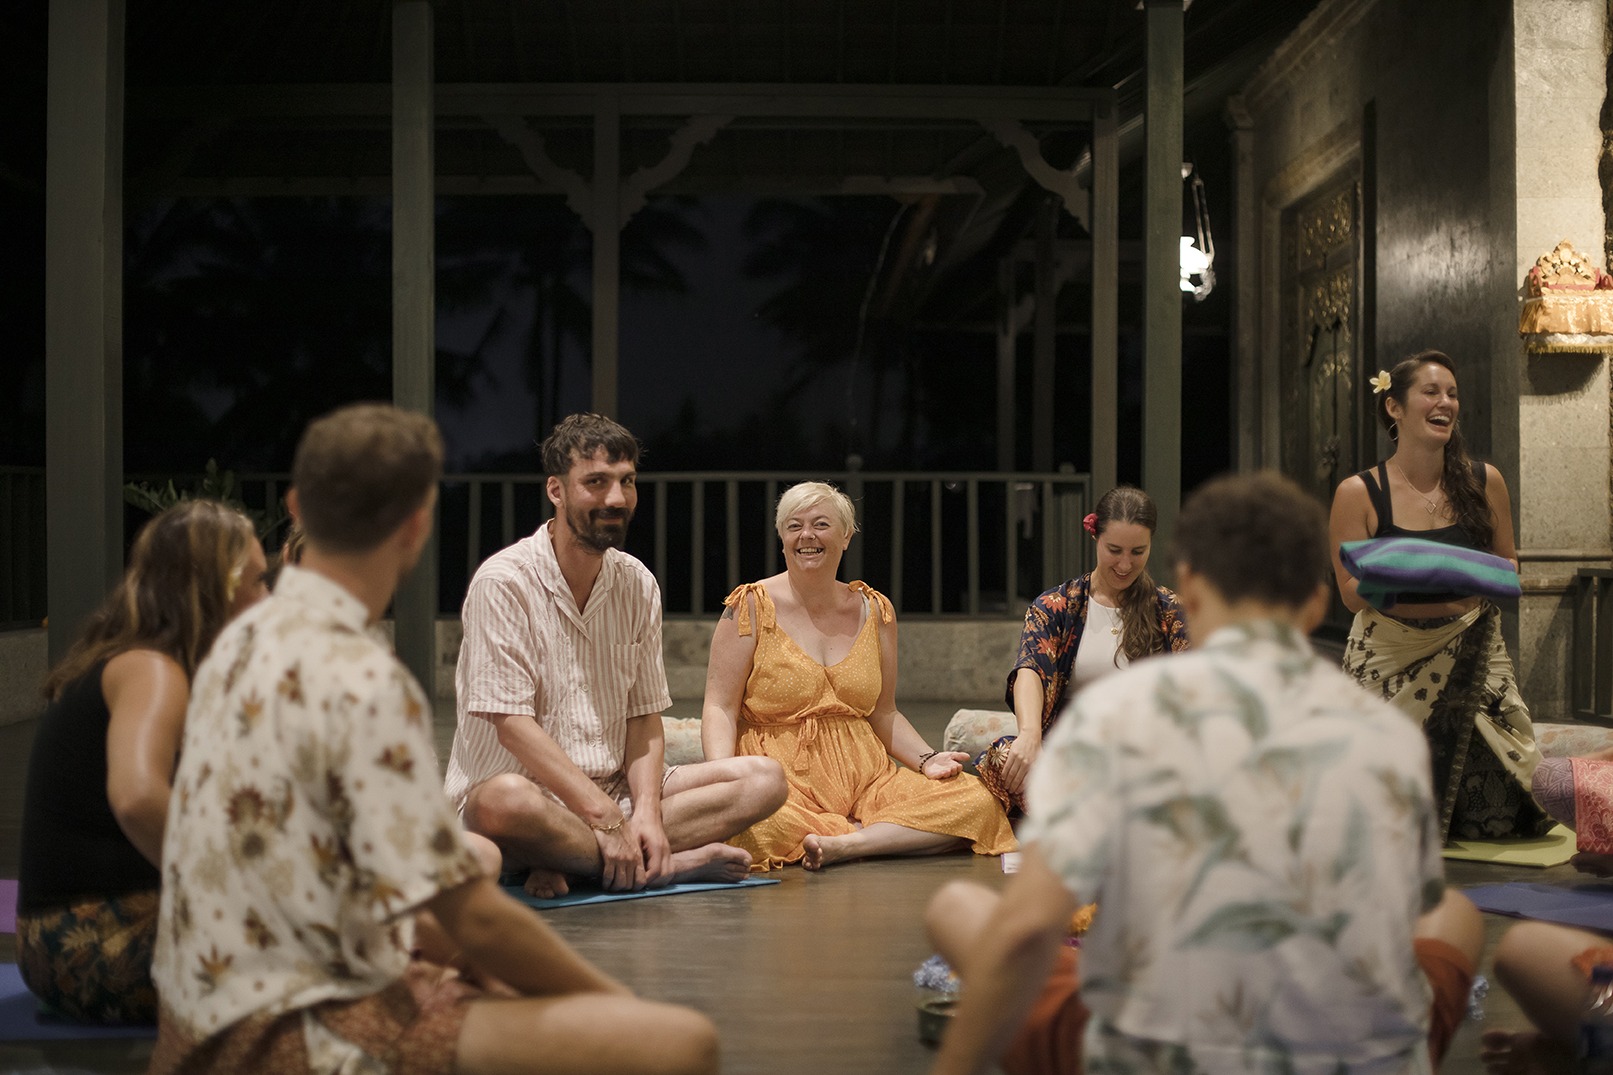 yoga teacher laughing with her students around a floral arrangement in Bali